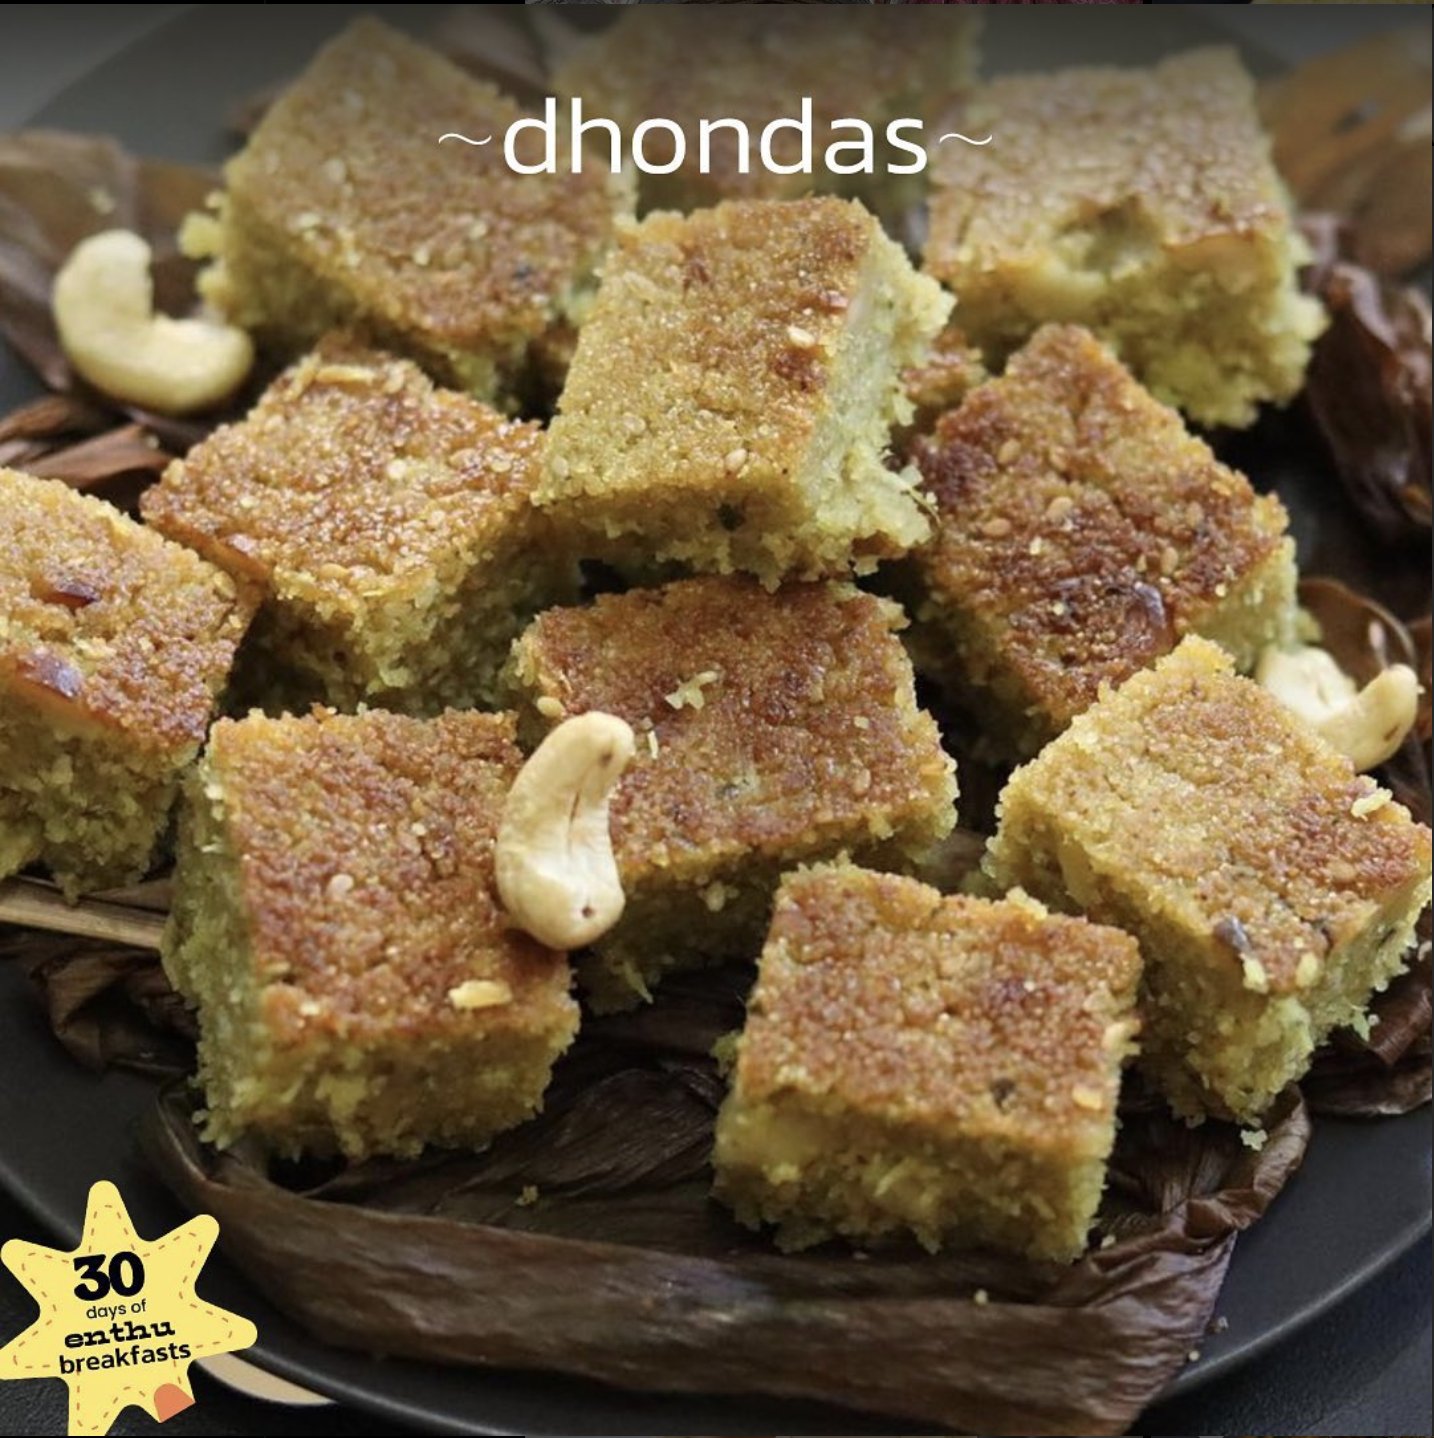 Enthucutlet on X: Welcome to #30DaysOfenthuBreakfasts 🍳 We're exploring  India's delicious diversity, one breakfast at a time ✨ Here's our first-  Dhondas. A Konkan preparation of steamed cucumber cake. #konkan #breakfast  #enthucutlet #